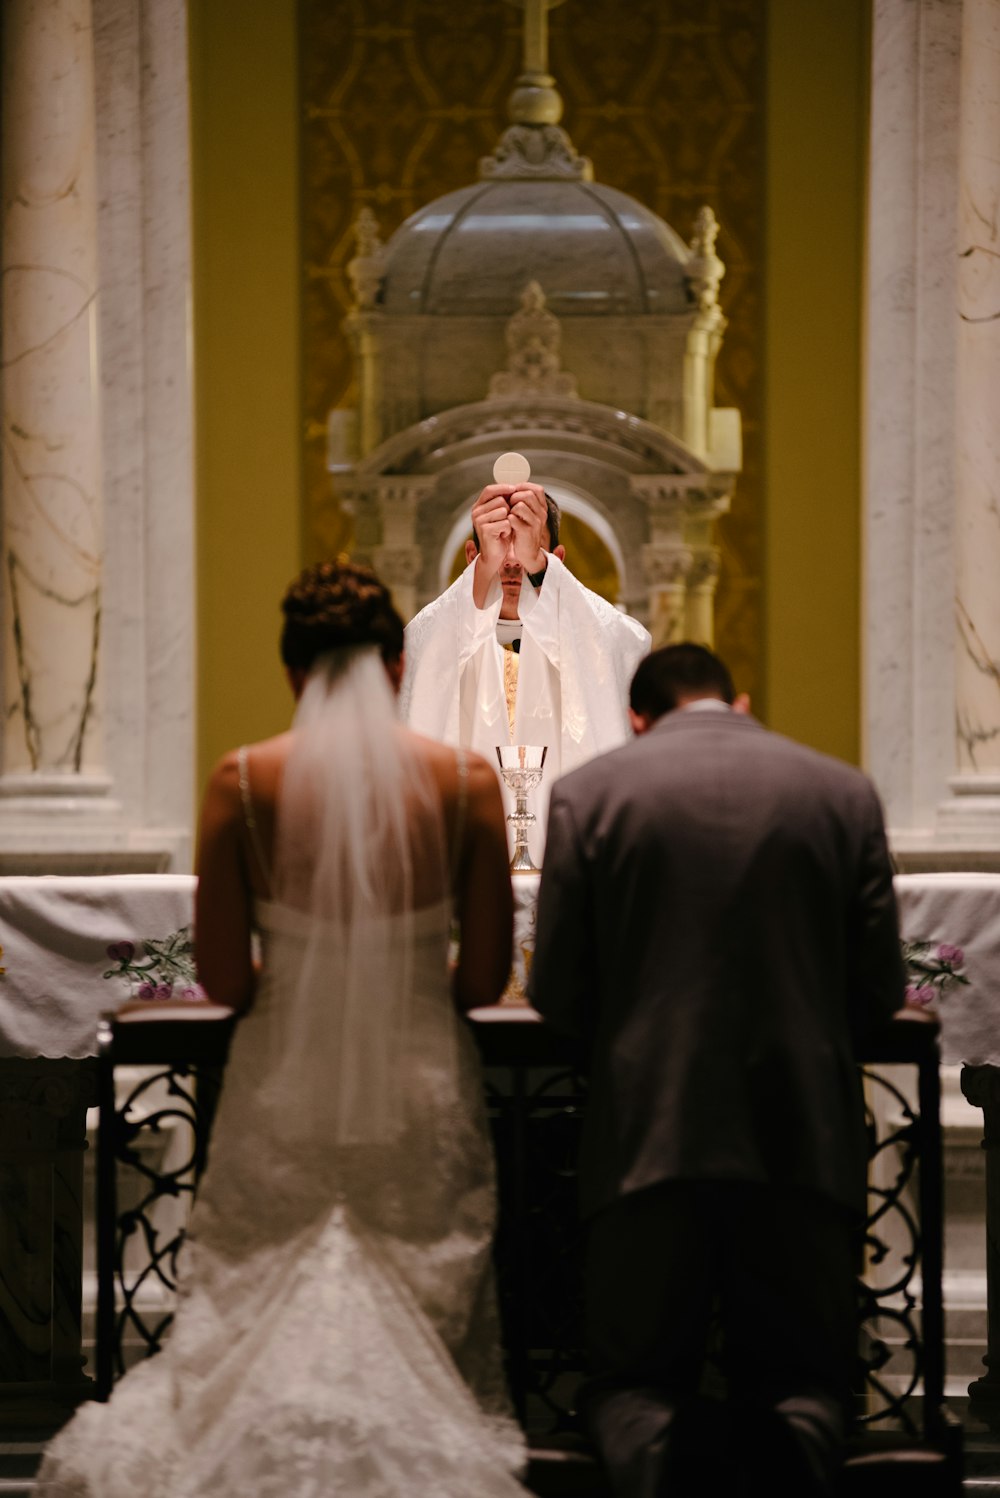 groom and bride kneeling in front of priest raising The Holy Sacrament